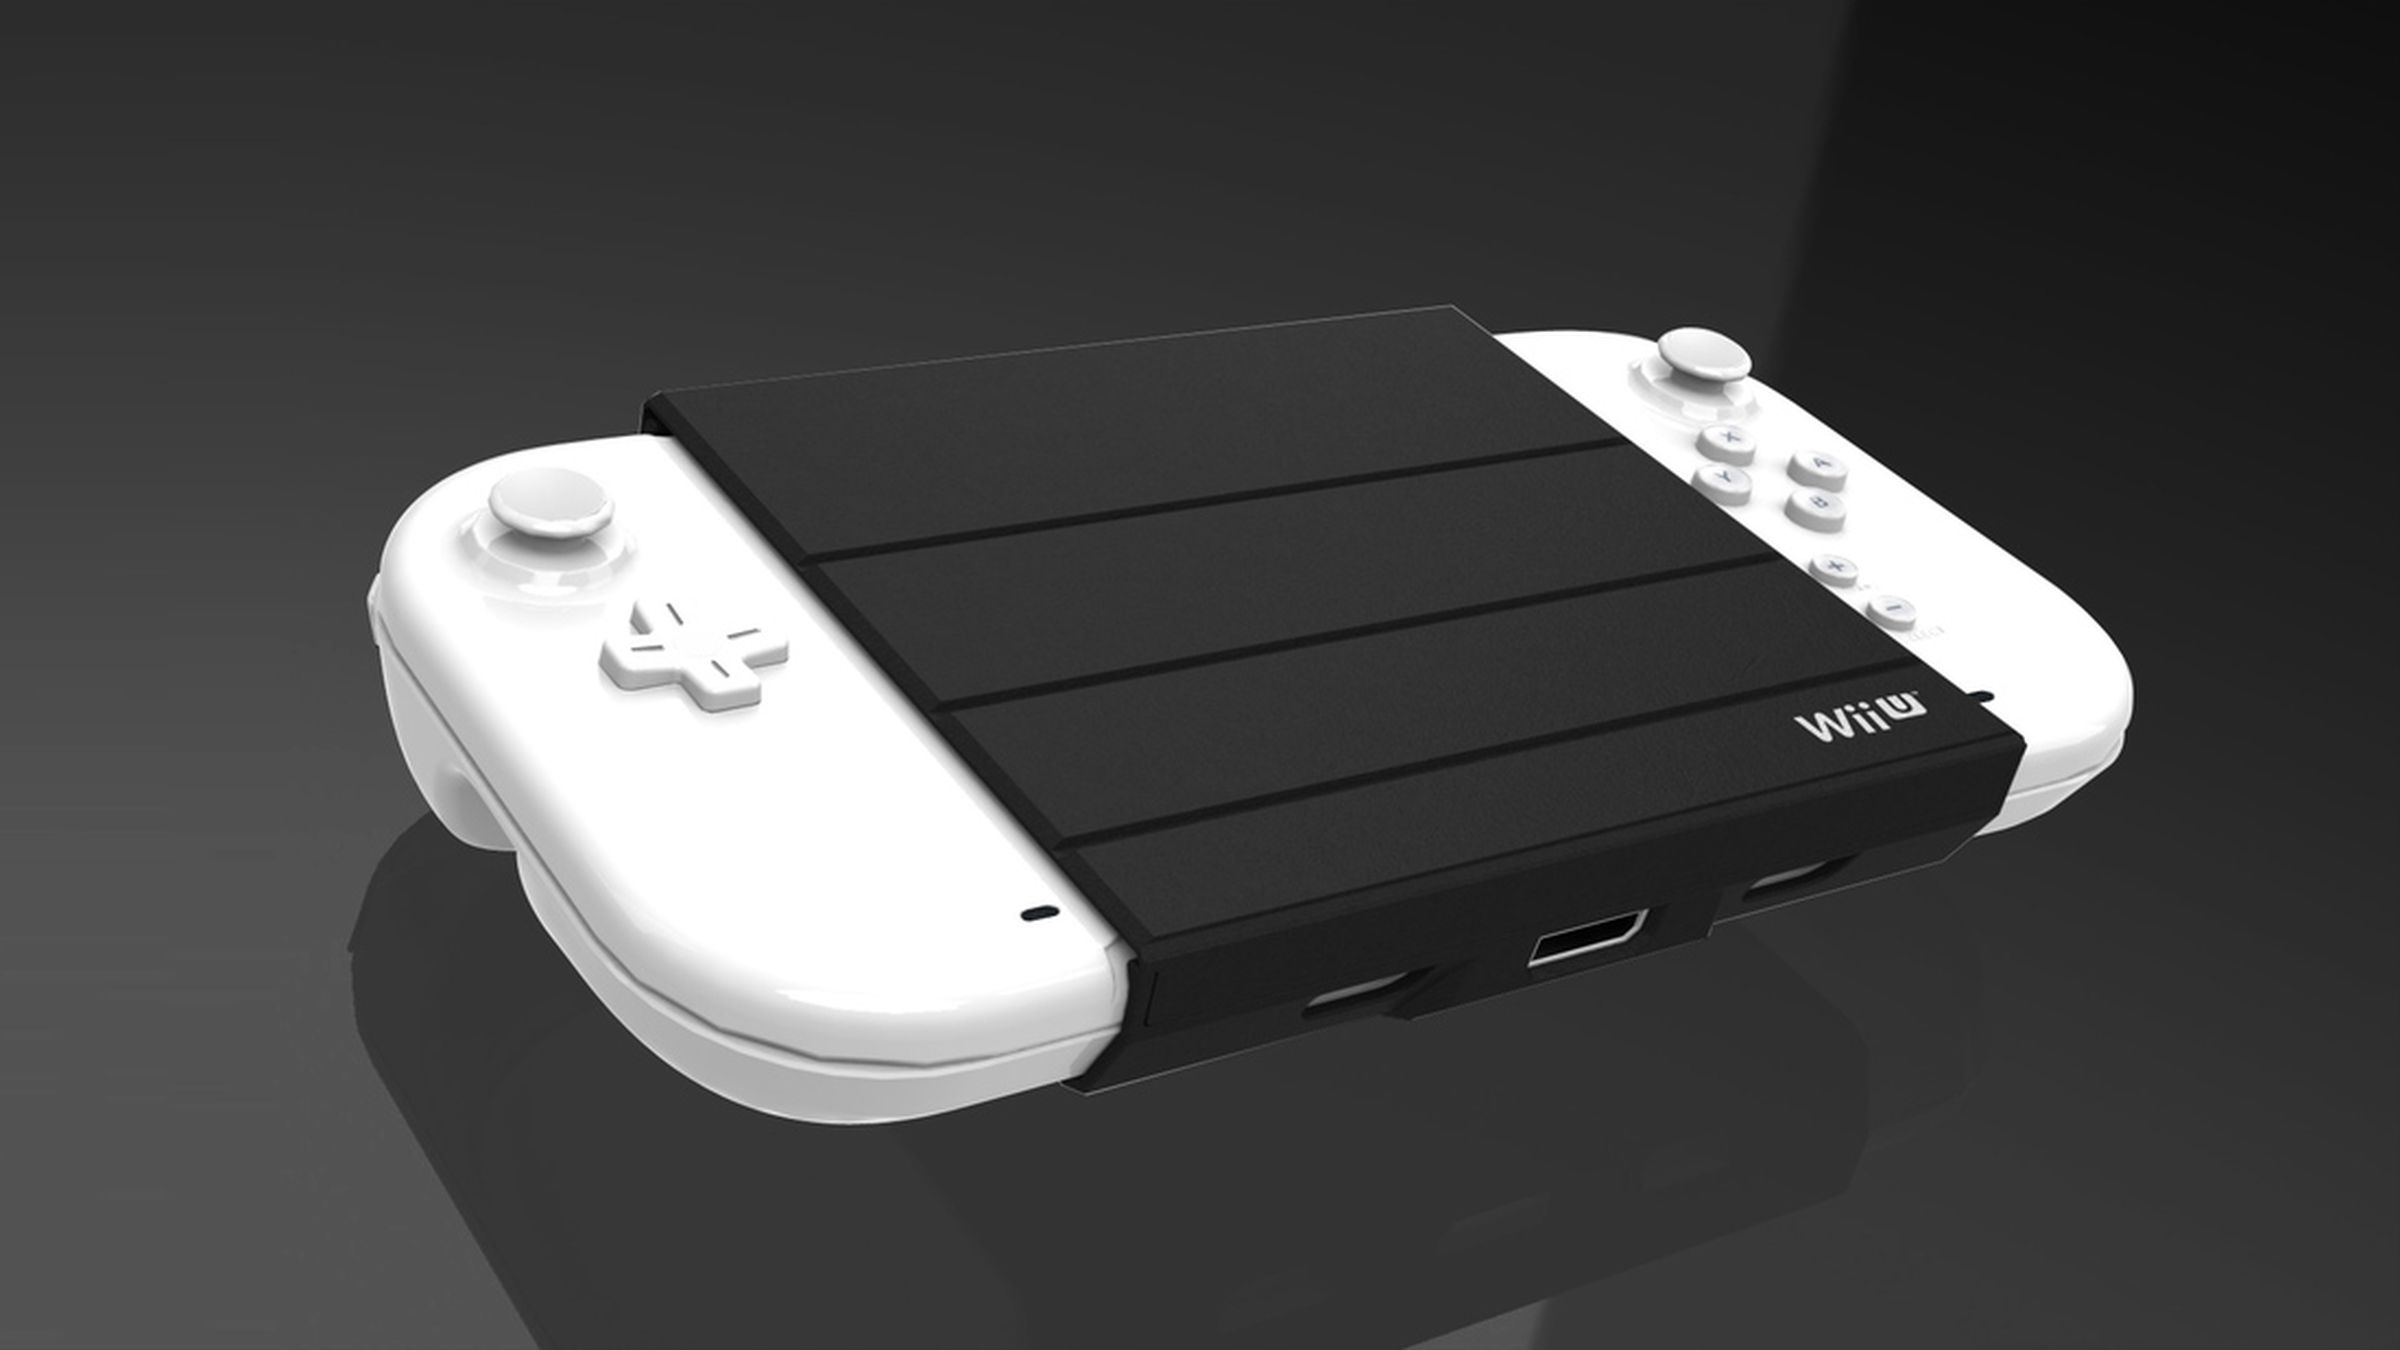 Mad Catz announces new range of Wii U products